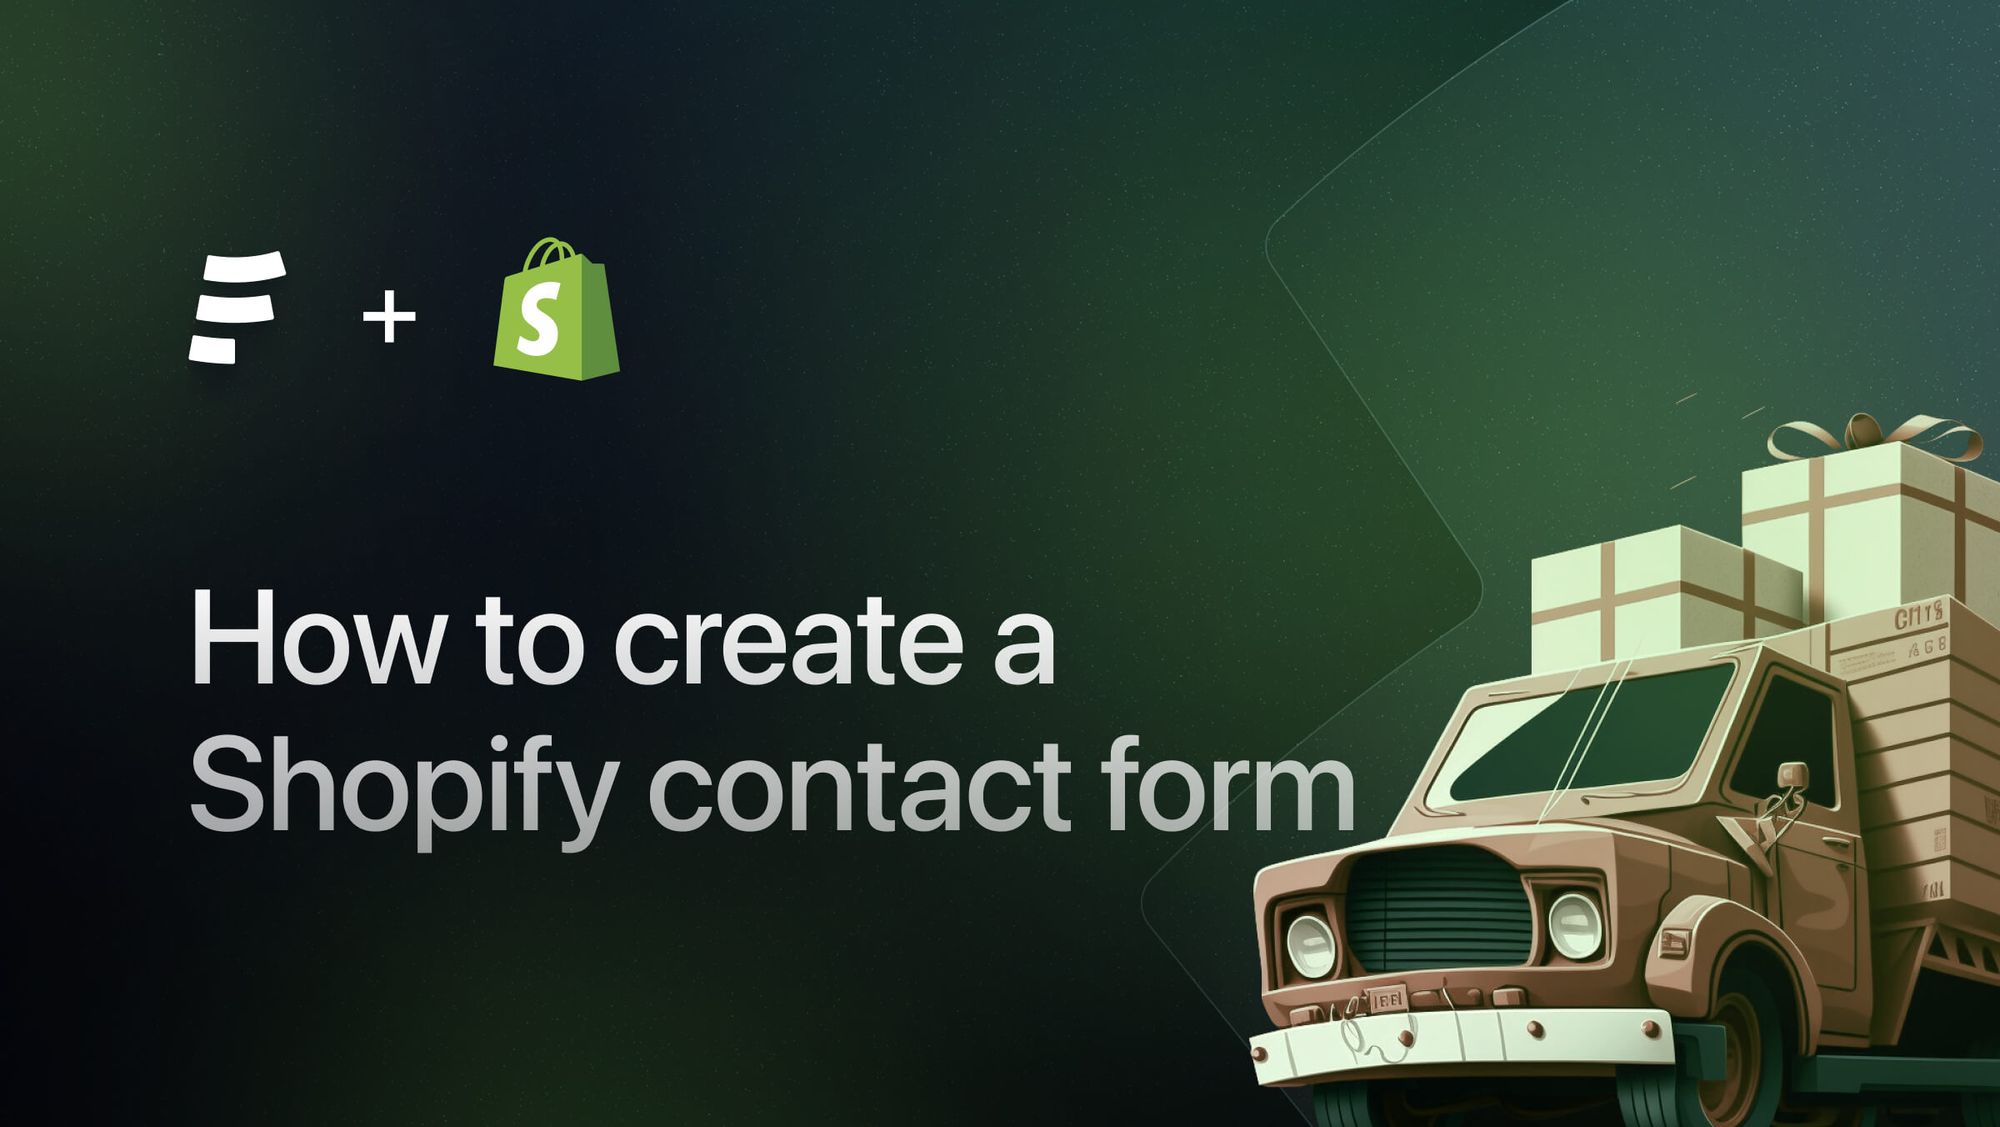 How to Easily Build a Shopify Page: A Step-by-Step Guide